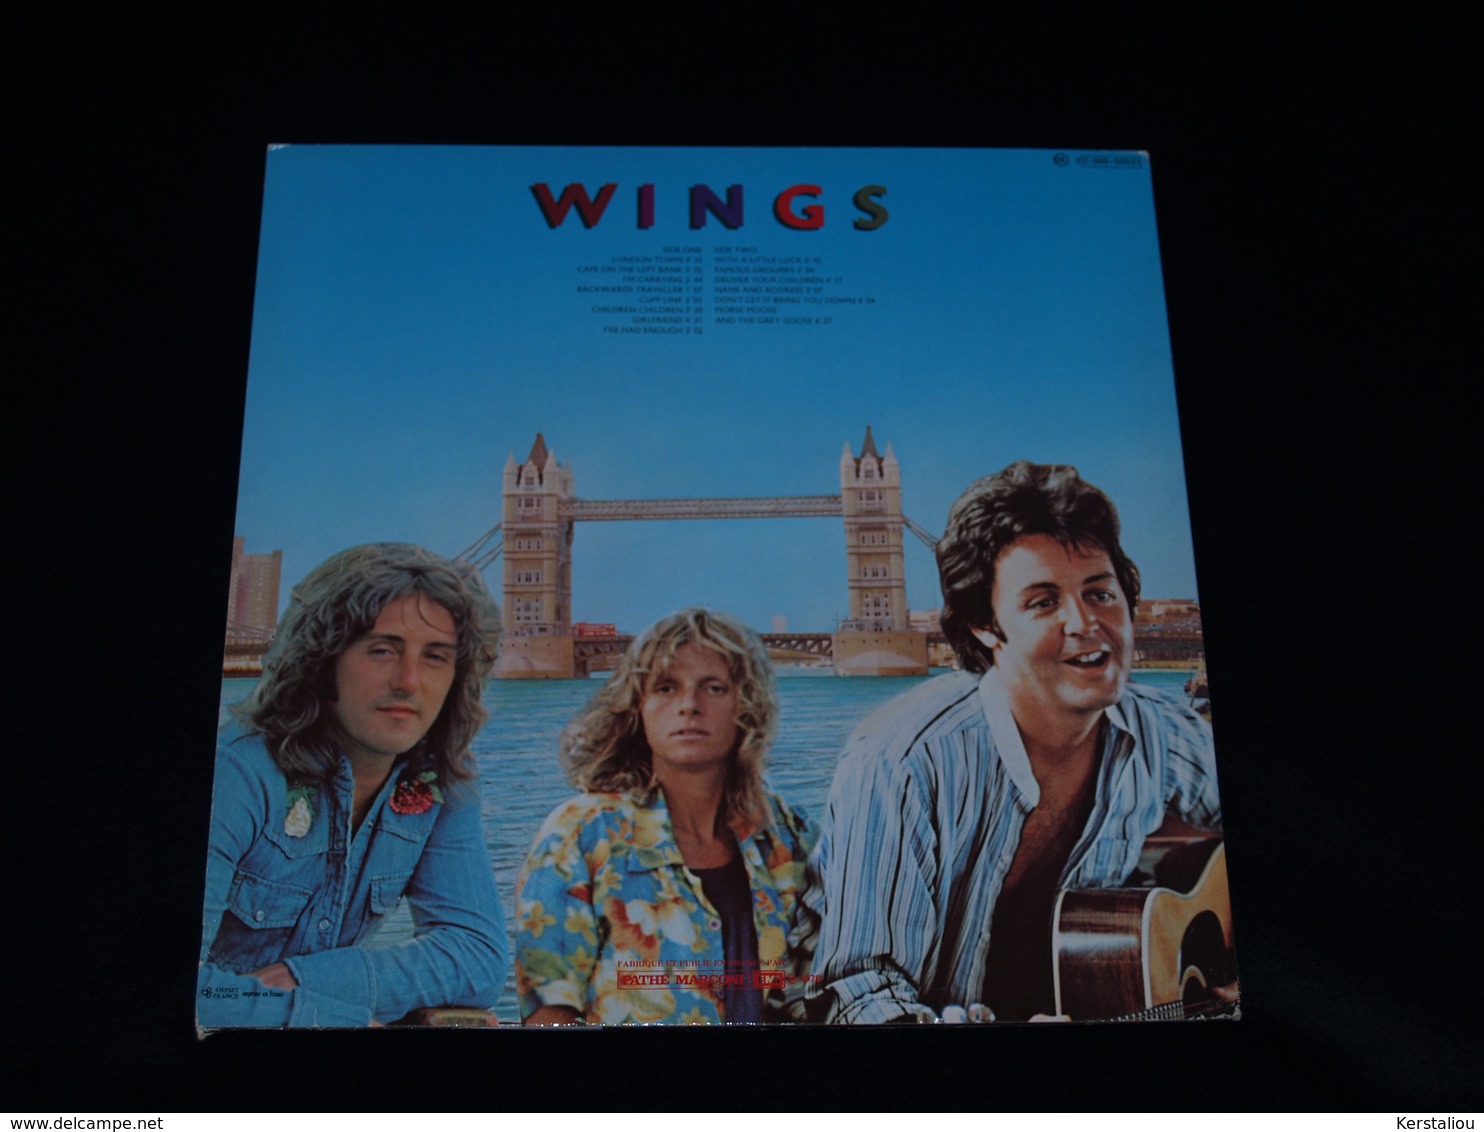 WINGS–"At the speed of sound & London town"–2 LP–1976 & 1978